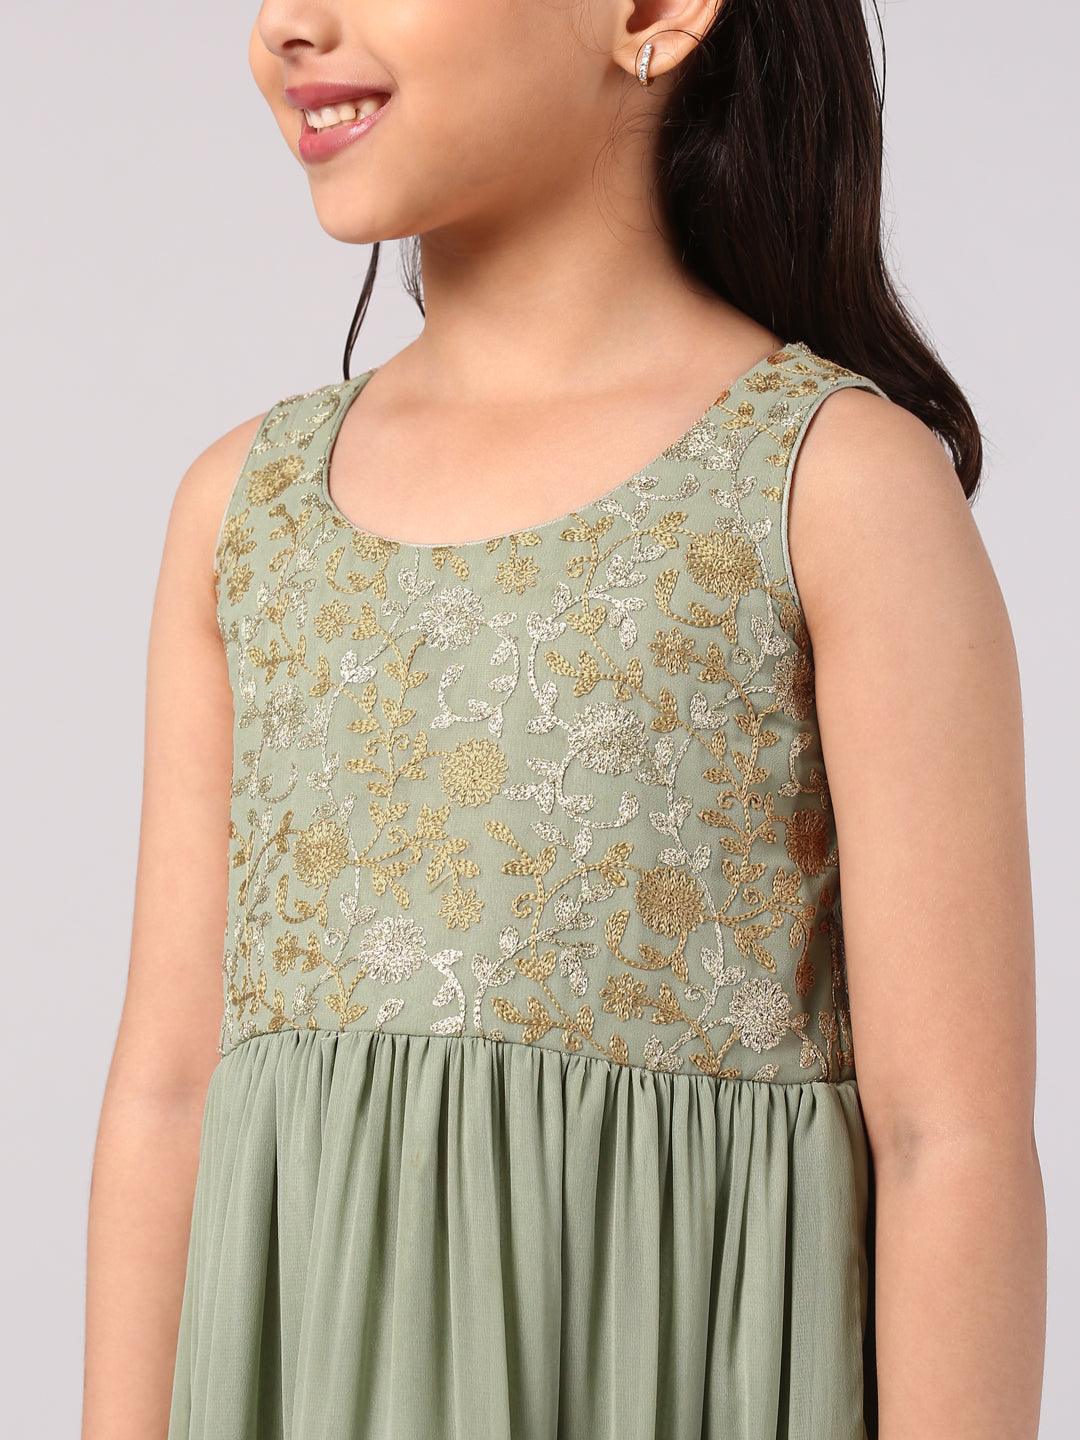 Green Embroidered Georgette Dress - Libas